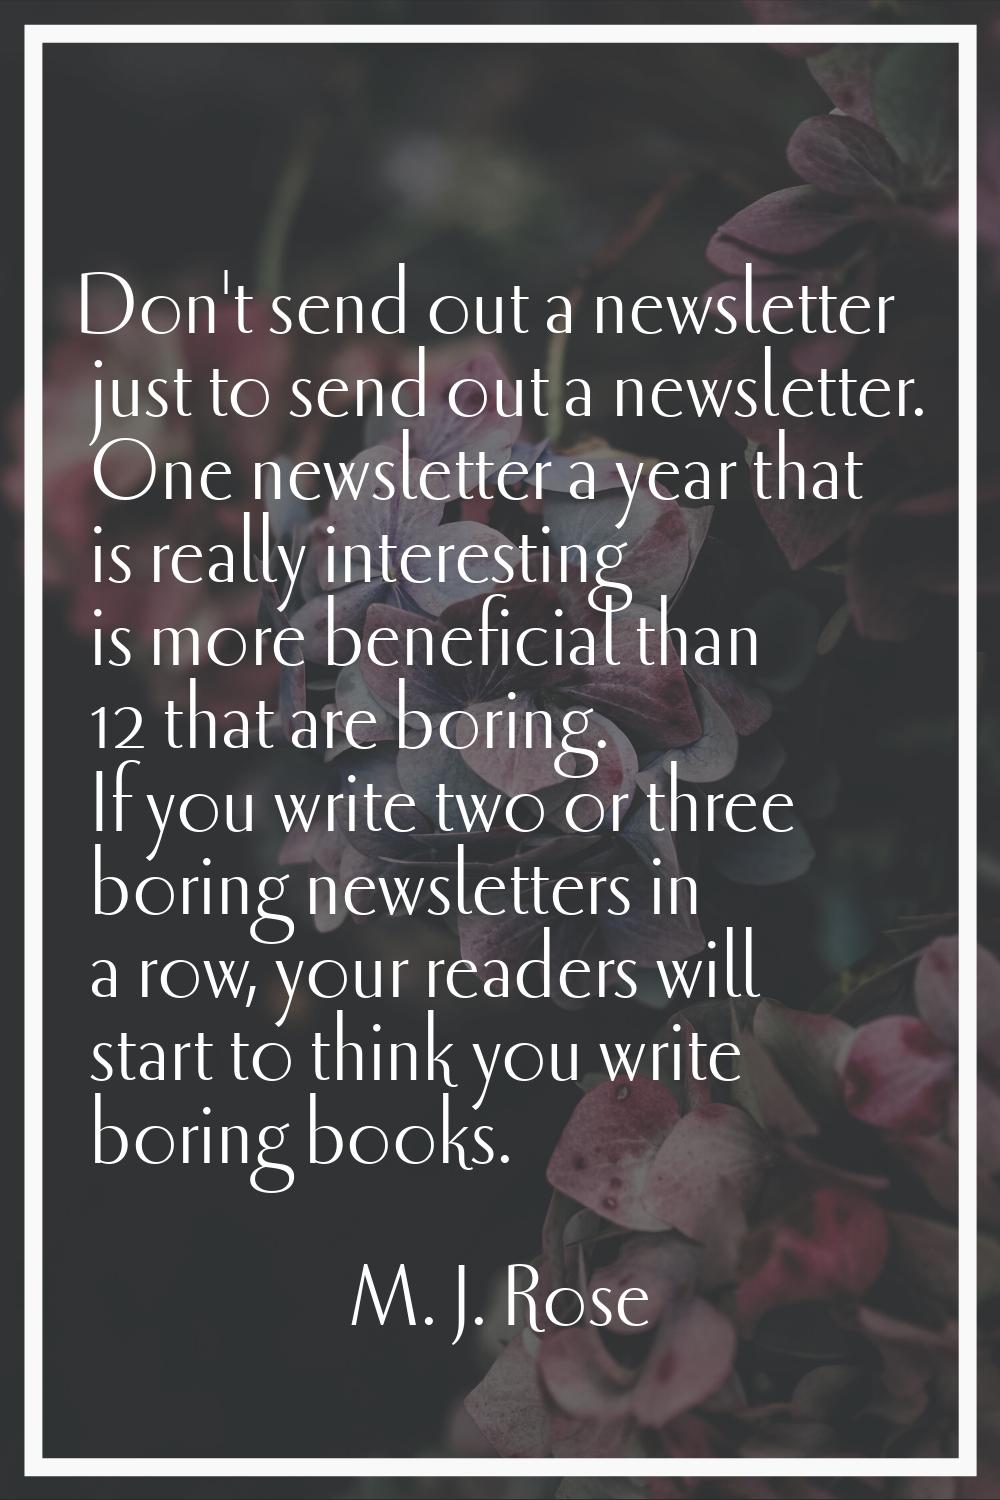 Don't send out a newsletter just to send out a newsletter. One newsletter a year that is really int